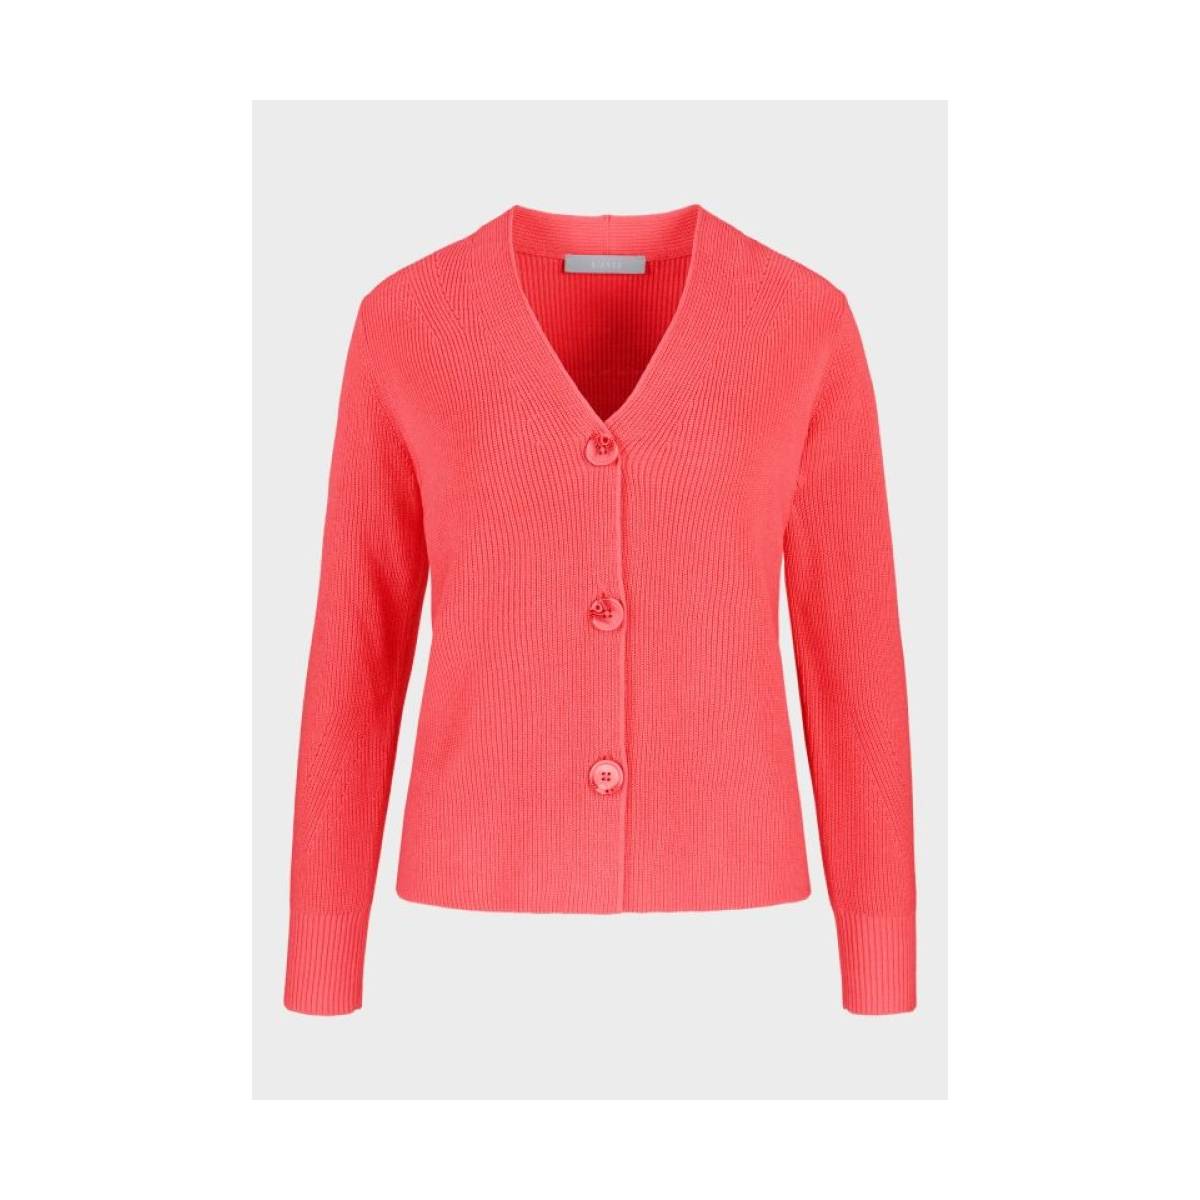 BIANCA  tricot pull's en gilets licht rood -  model 38015 - Dameskleding tricot pull's en gilets rood